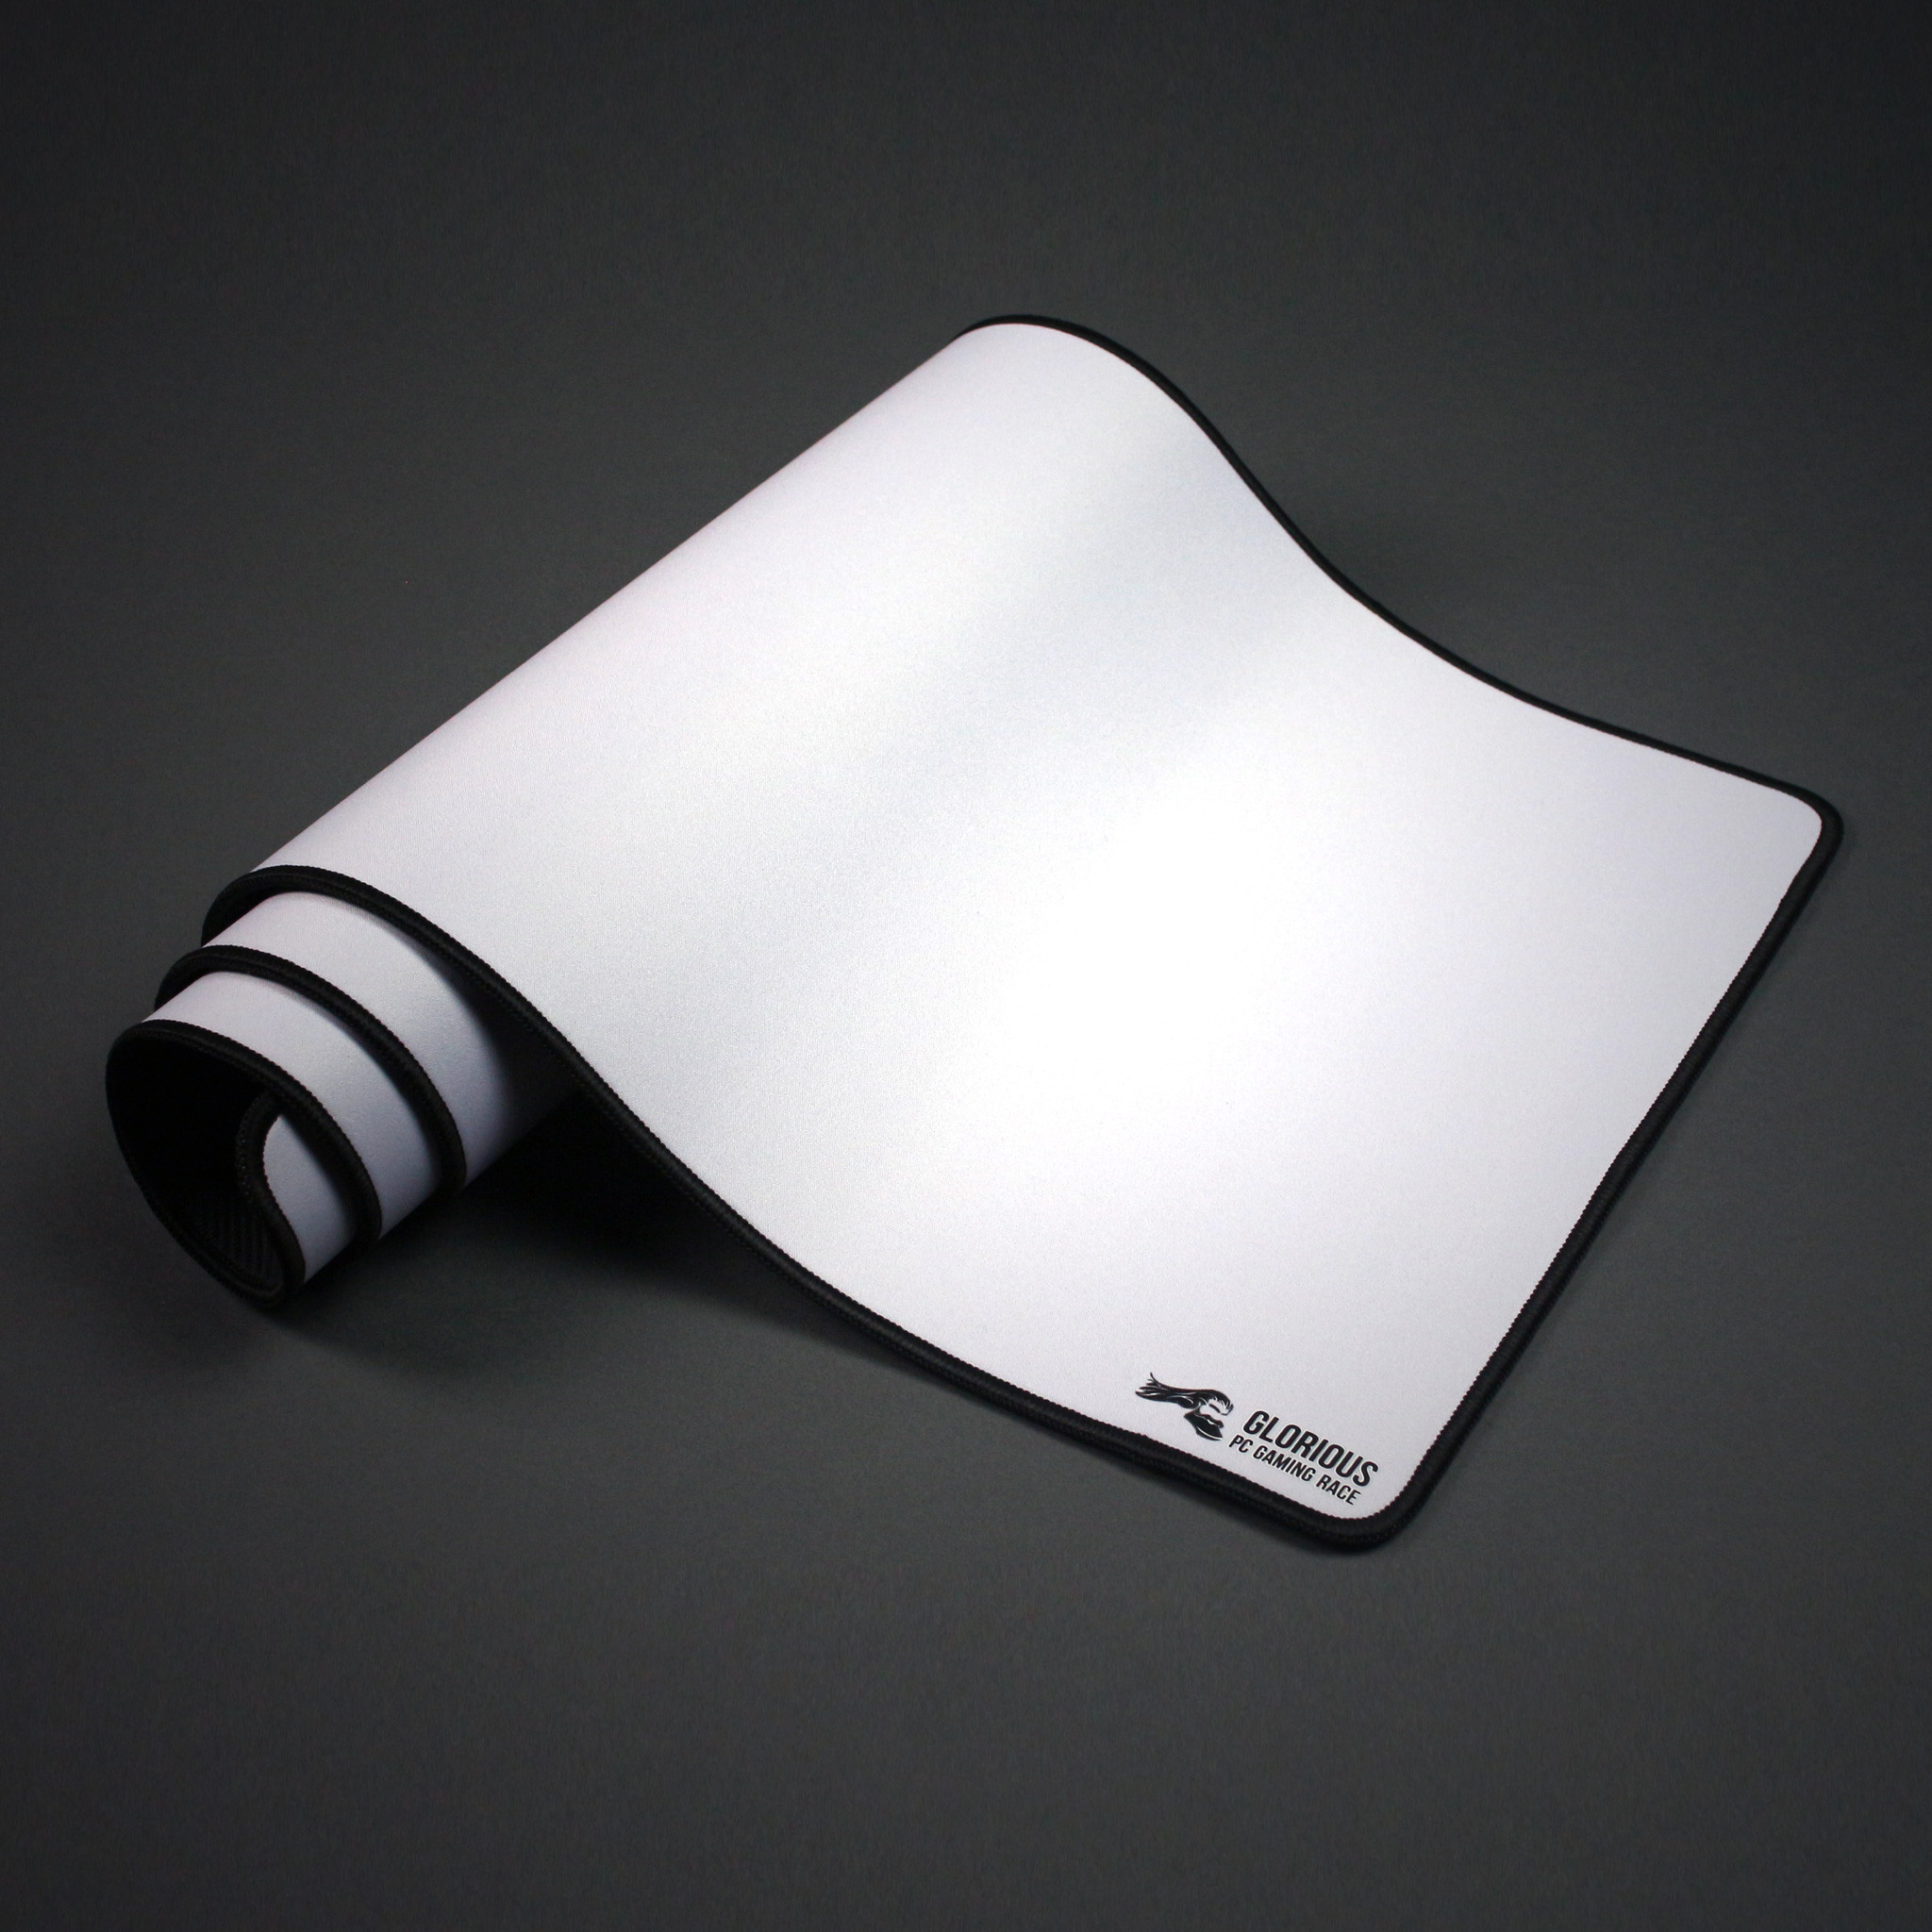 Glorious PC Gaming Race RNAB07JP6P8Y2 glorious extended gaming mouse  pad/mat - long white cloth mousepad, stitched edges